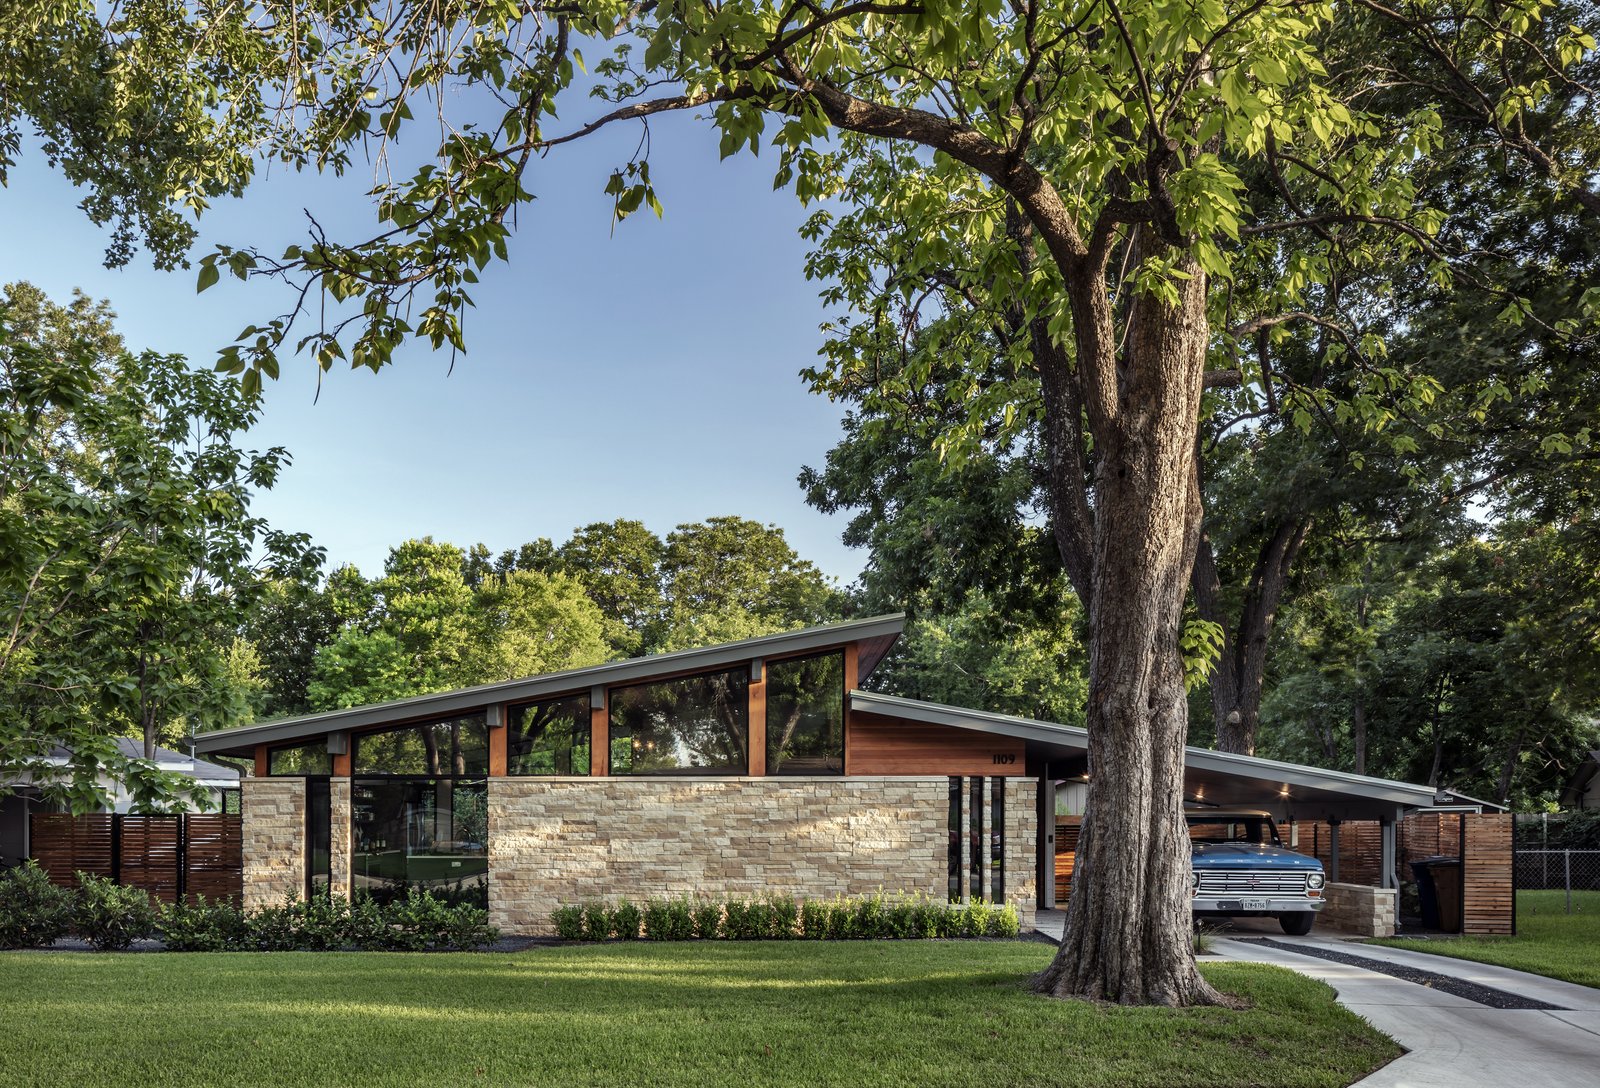 when-austin-based-firm-matt-fajkus-architecture-was-tasked-with-renovating-this-classic-midcentury-home-they-sought-to-open-up-the-interiornot-only-by-unifying-the-common-area